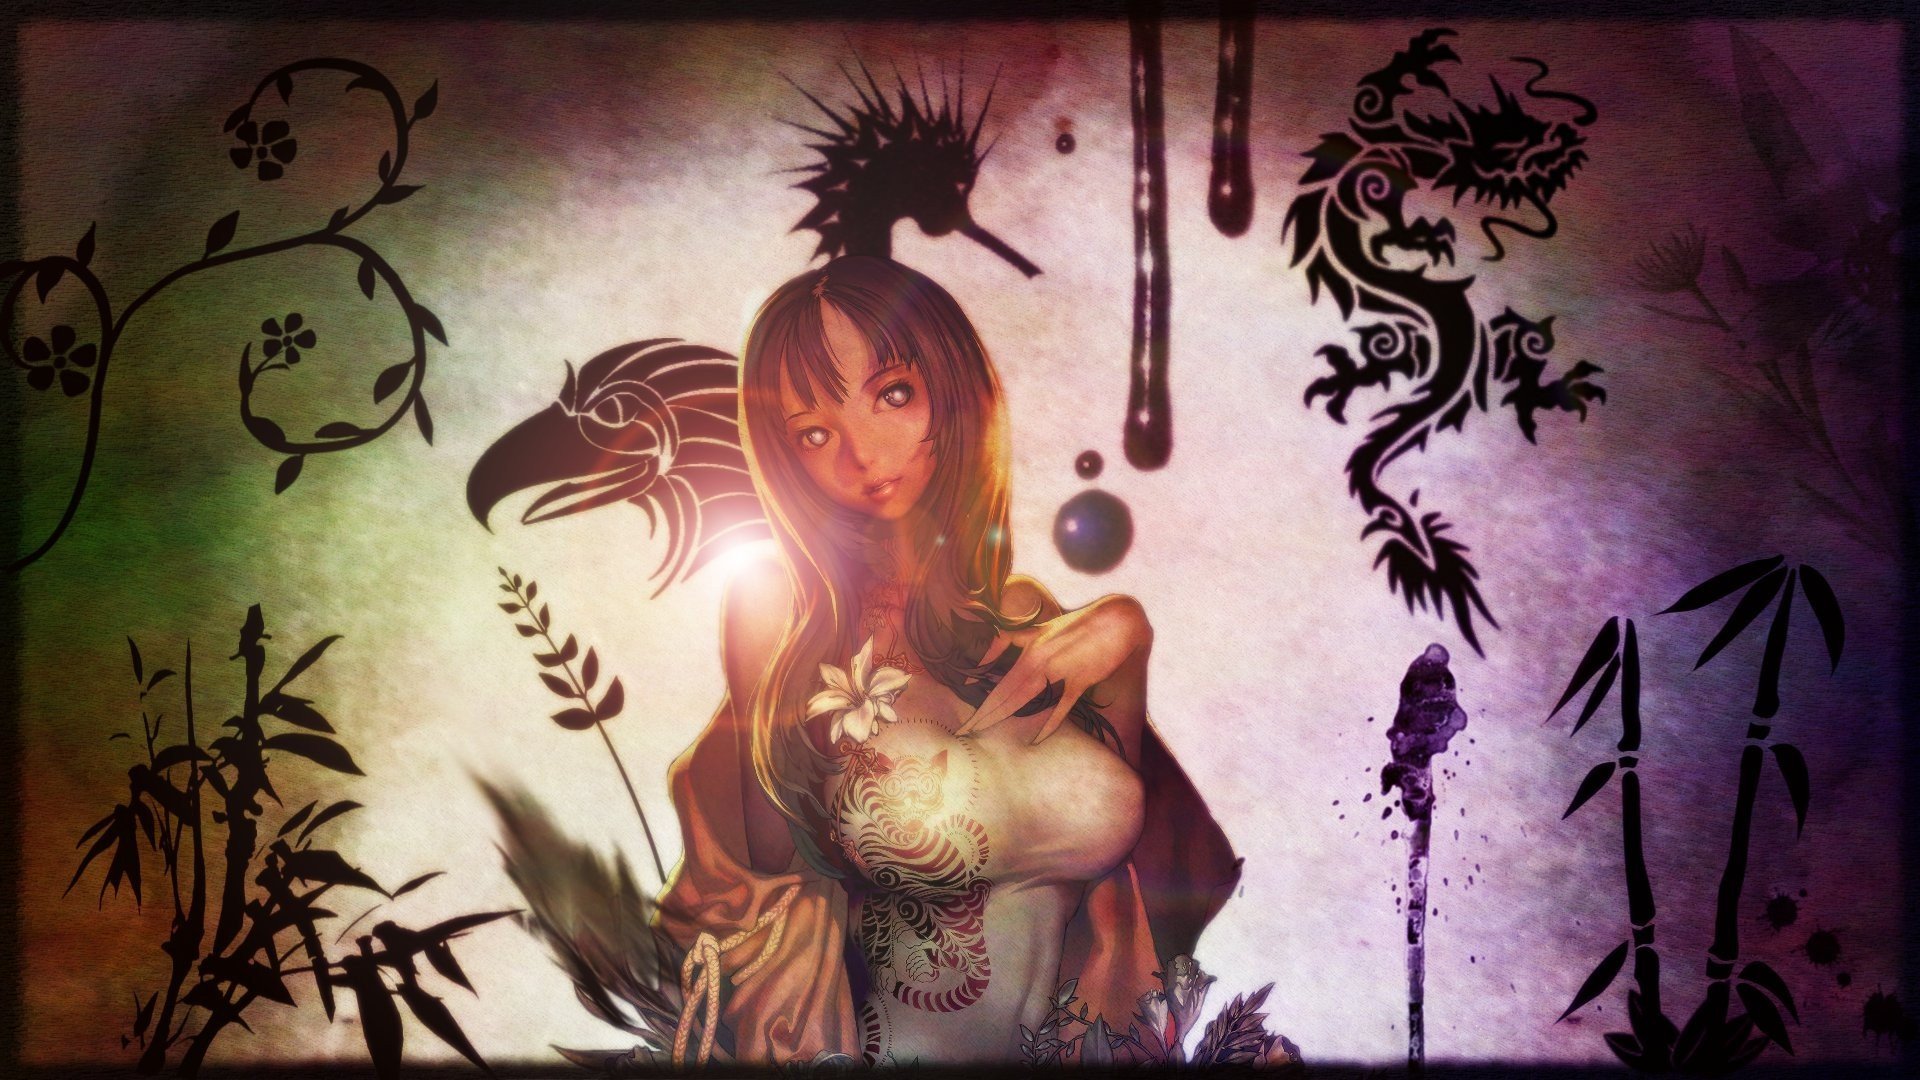 Blade and Soul Wallpaper